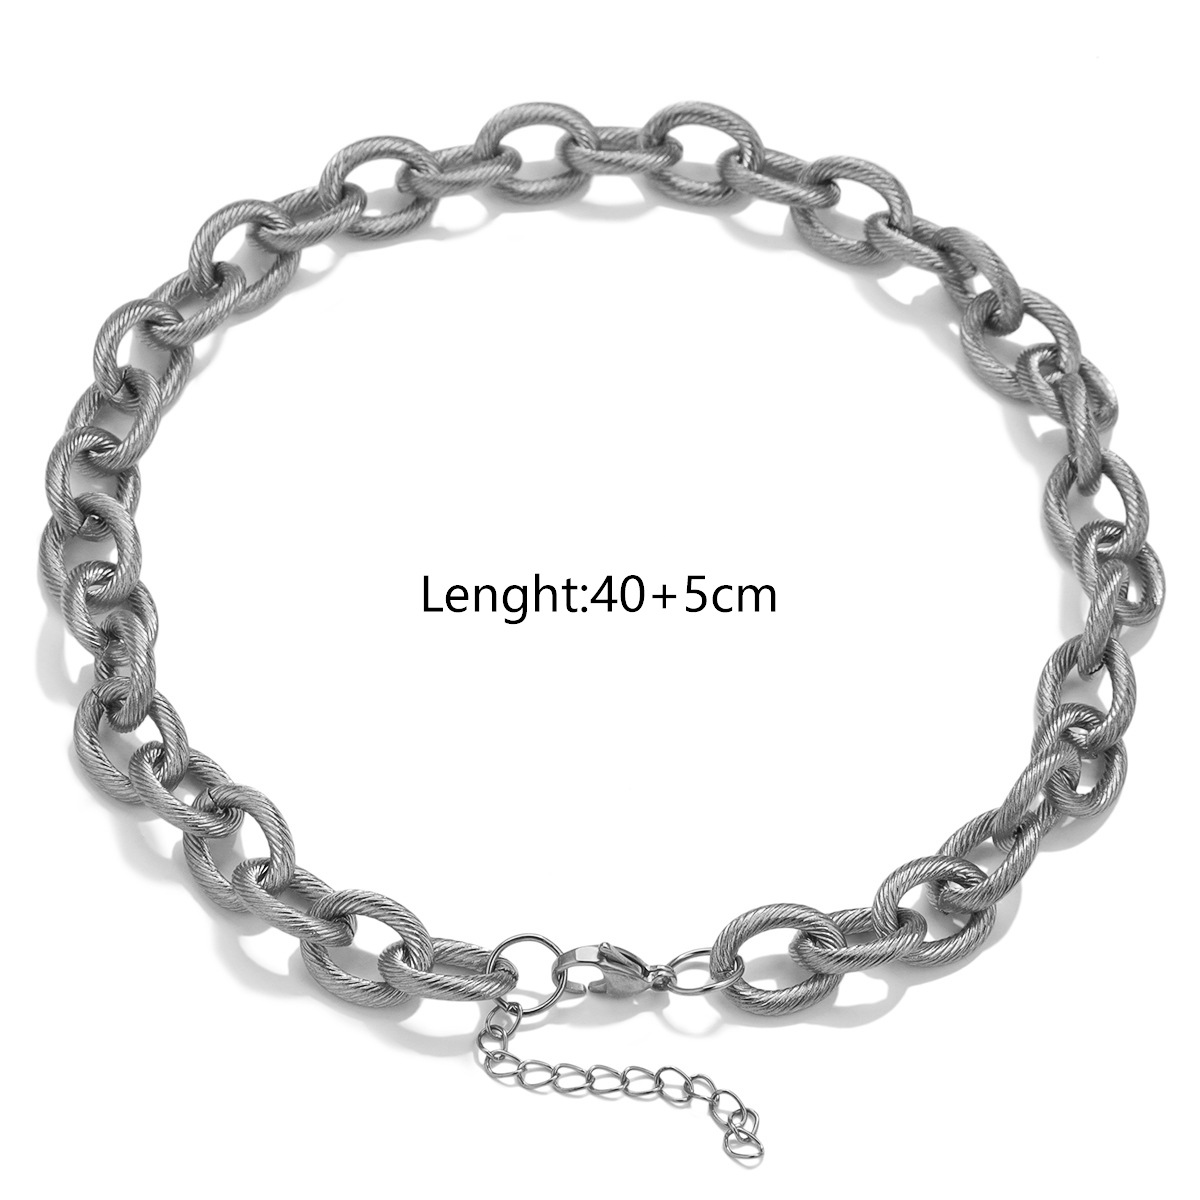 Steel necklace-40cm tail chain 5cm